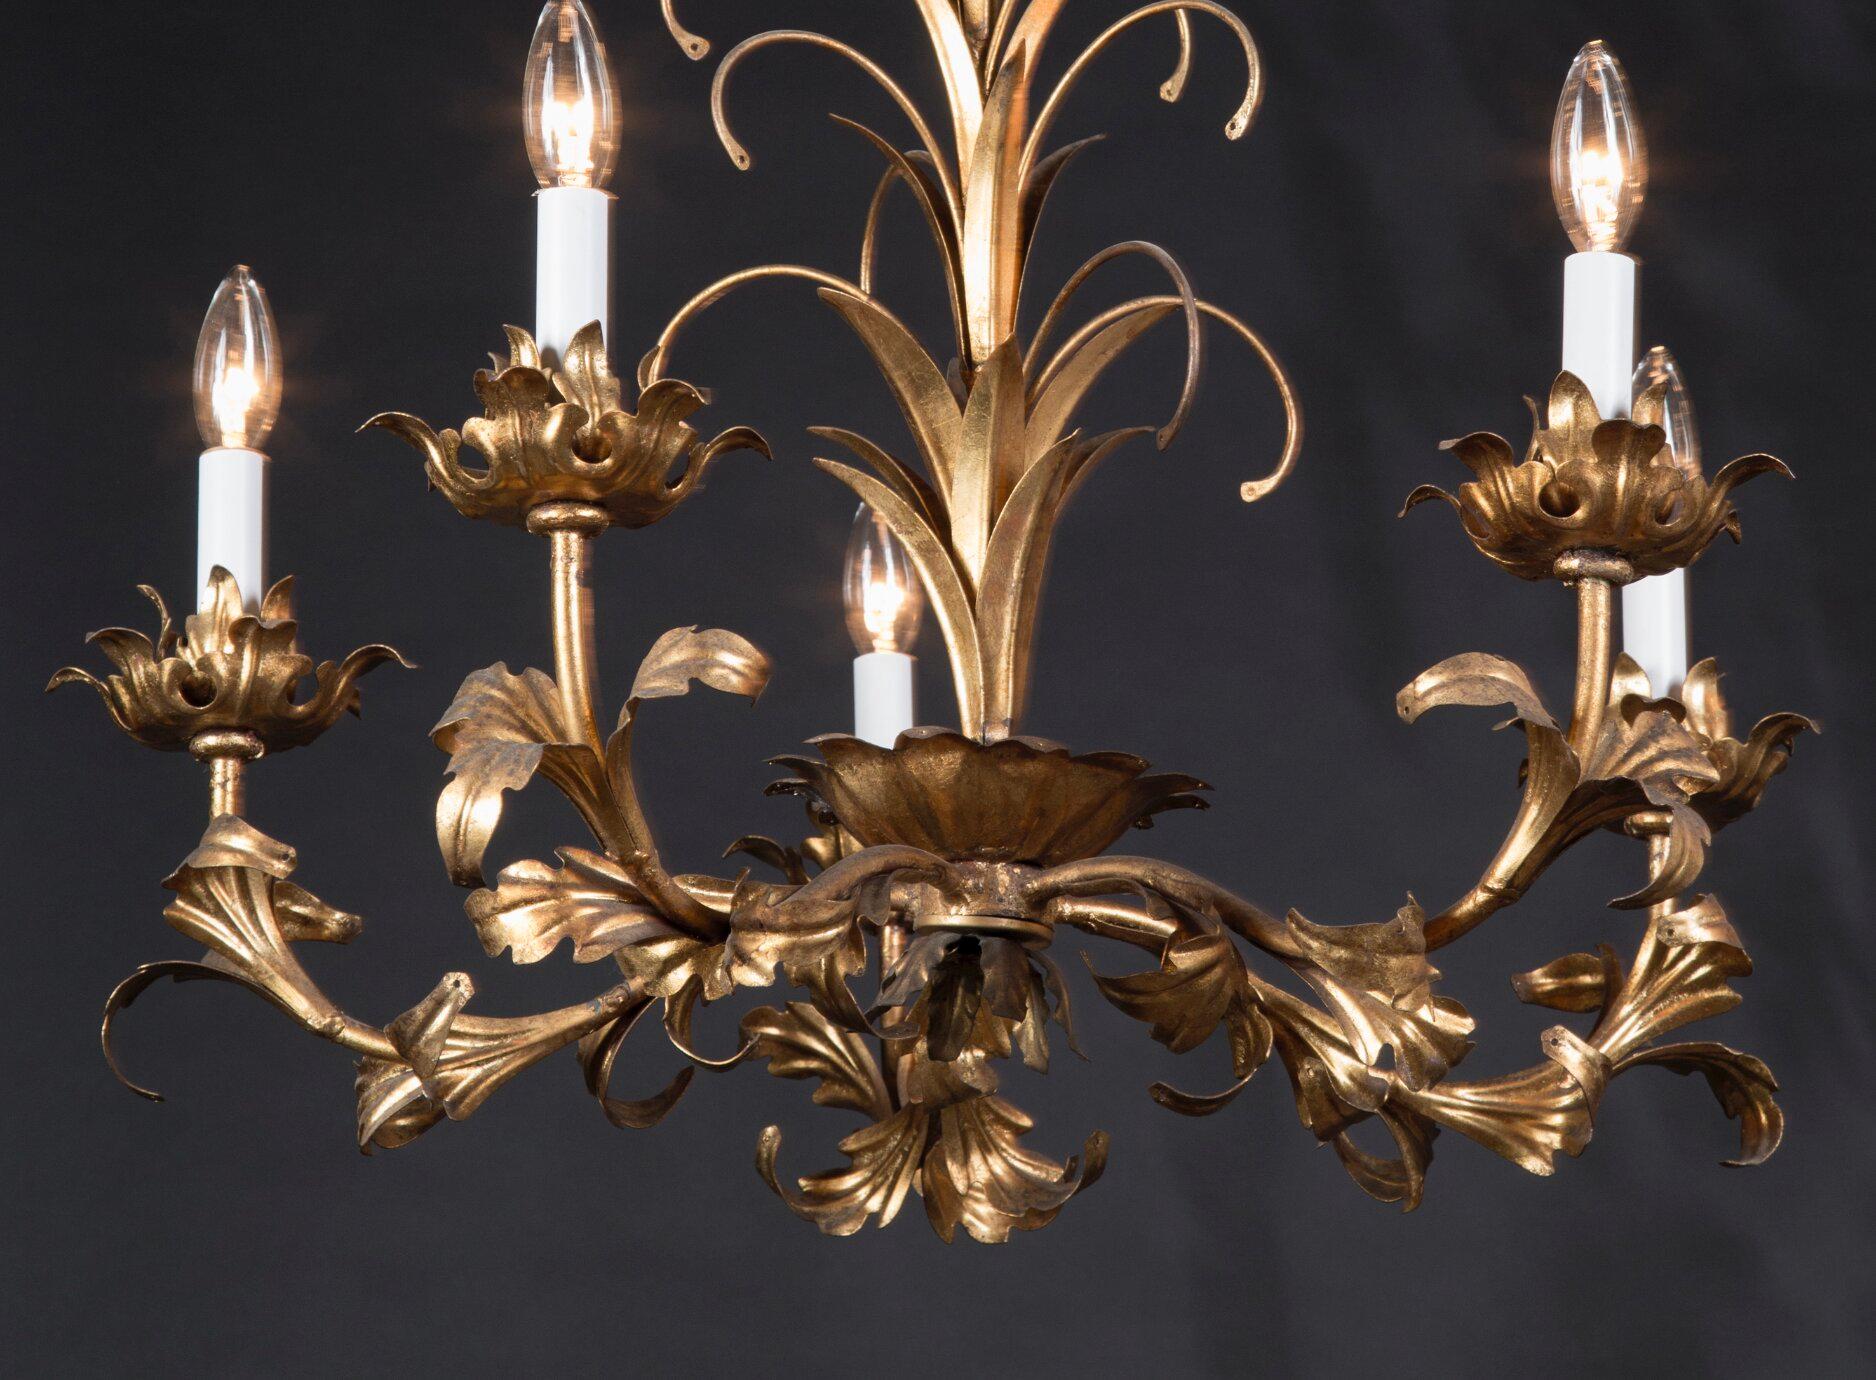 Italian Mid-20th Century Gilded Tole Chandelier In Good Condition For Sale In New Orleans, LA